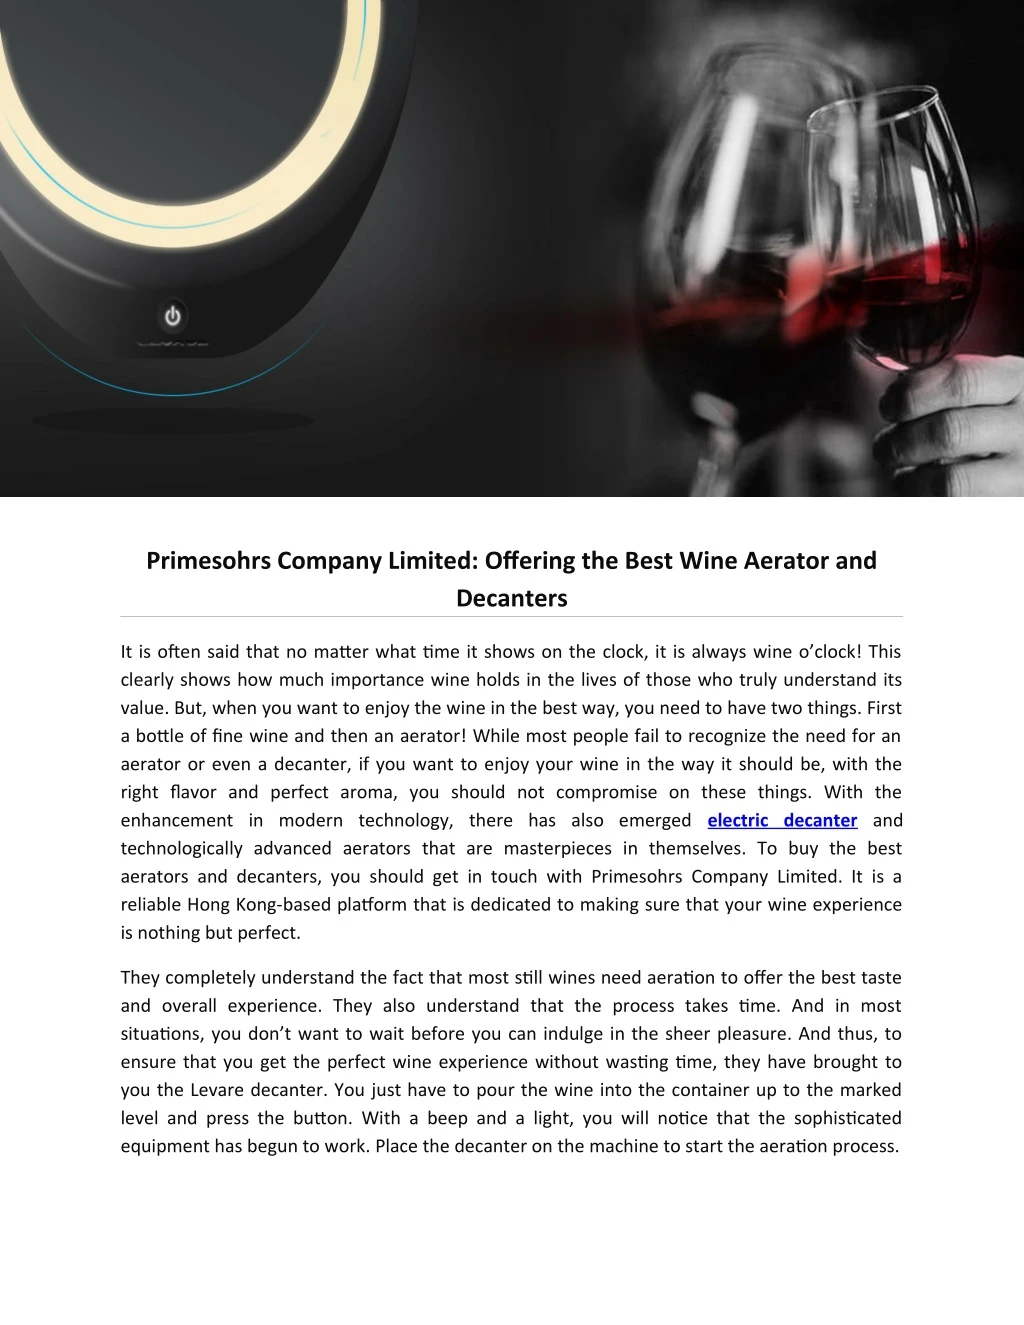 primesohrs company limited offering the best wine